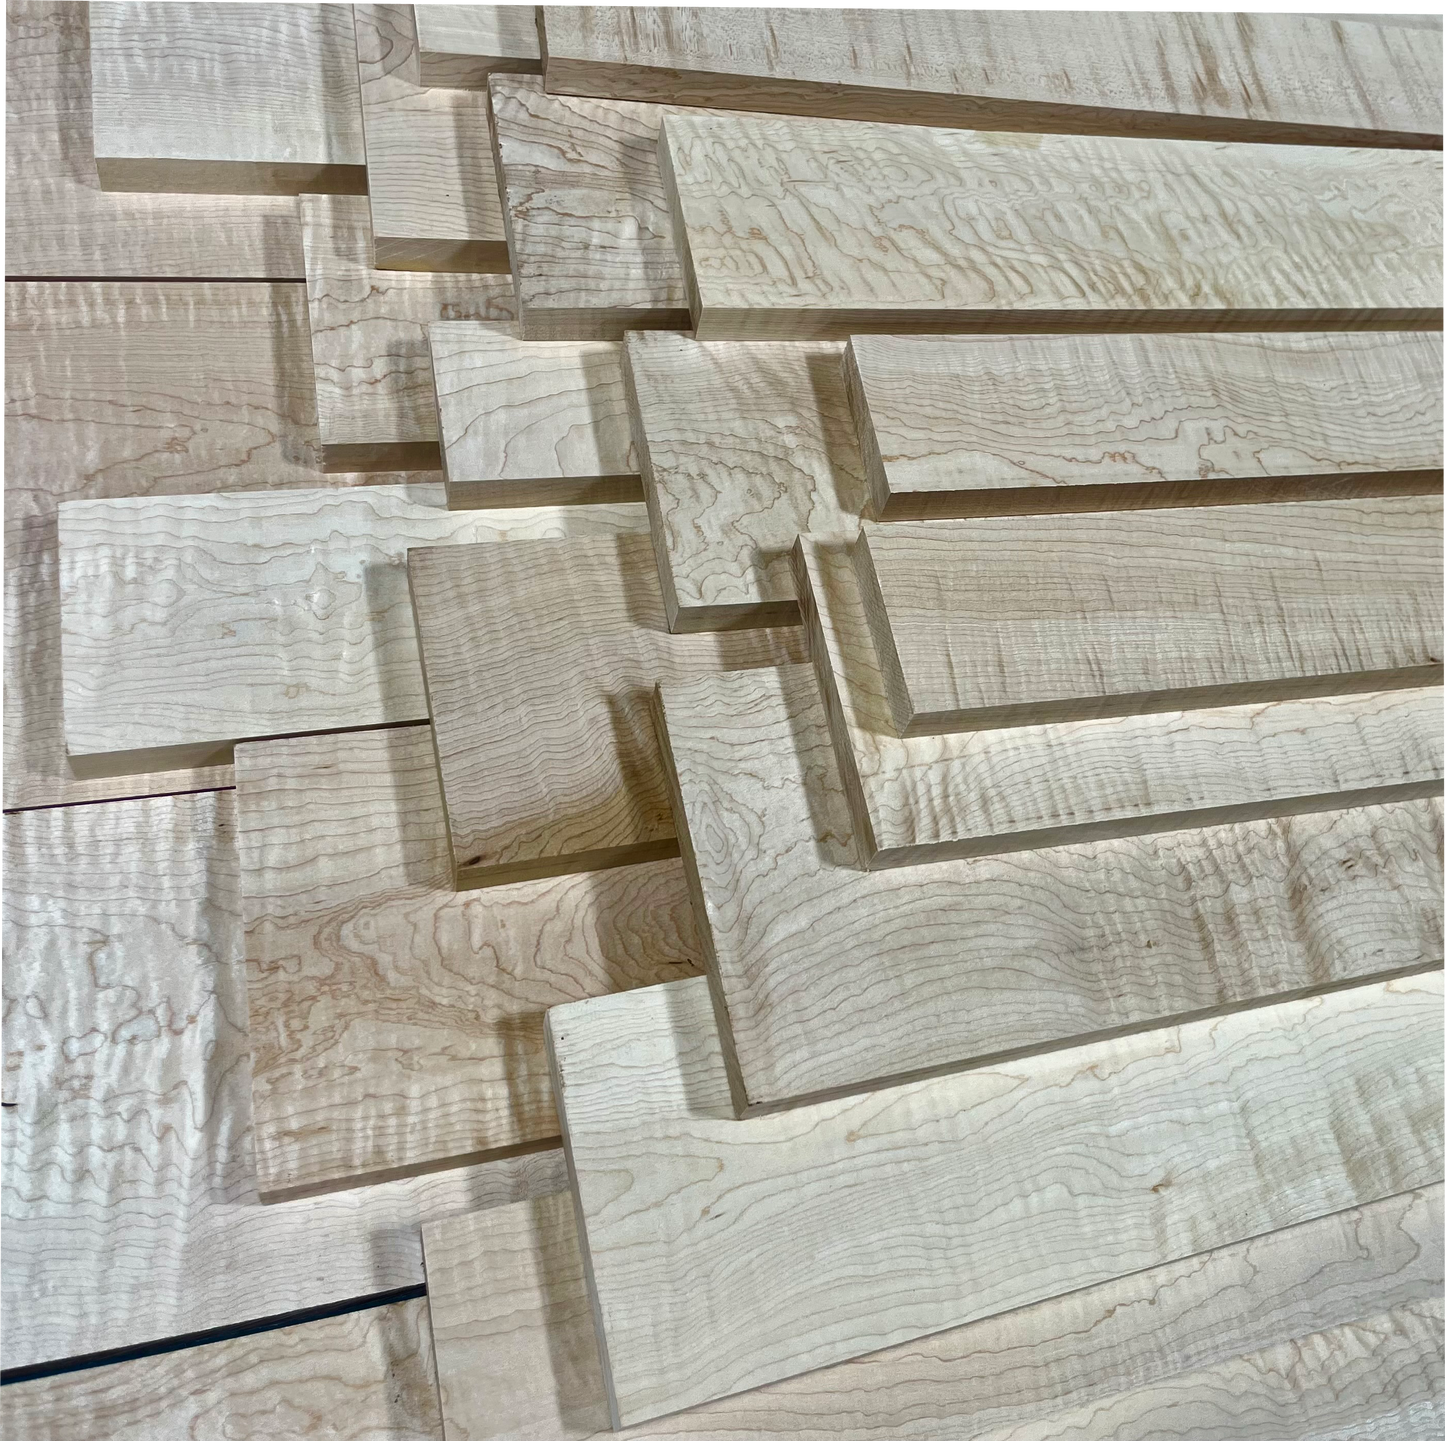 Curly Hard Maple - Dimensional Lumber